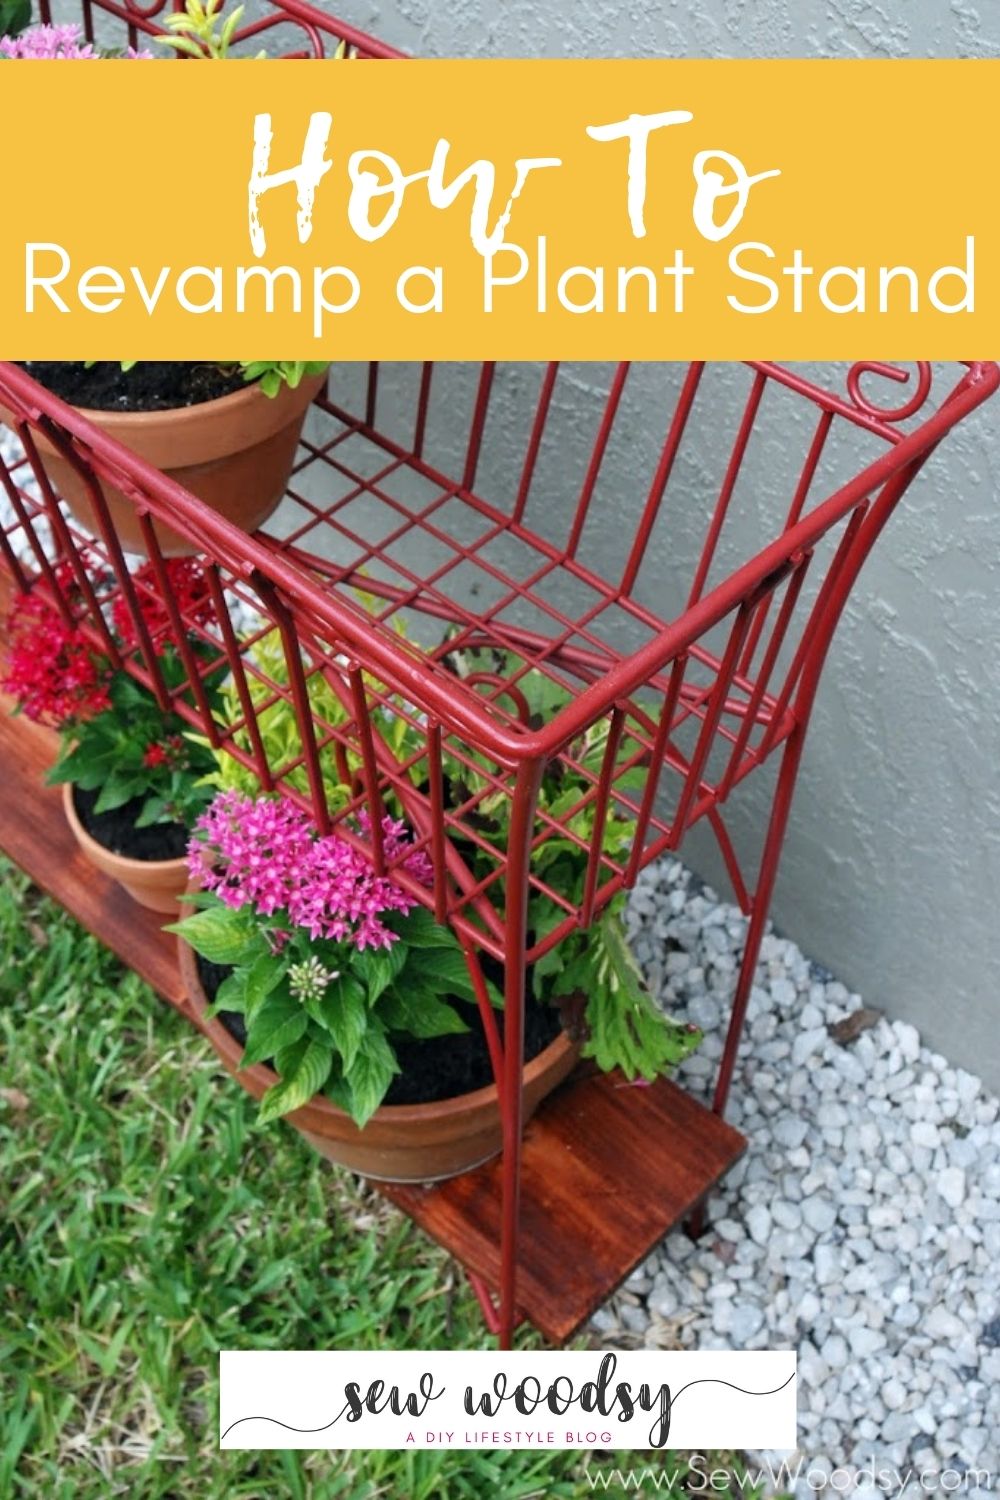 Close up of a red wire plant stand with text on image for Pinterest.